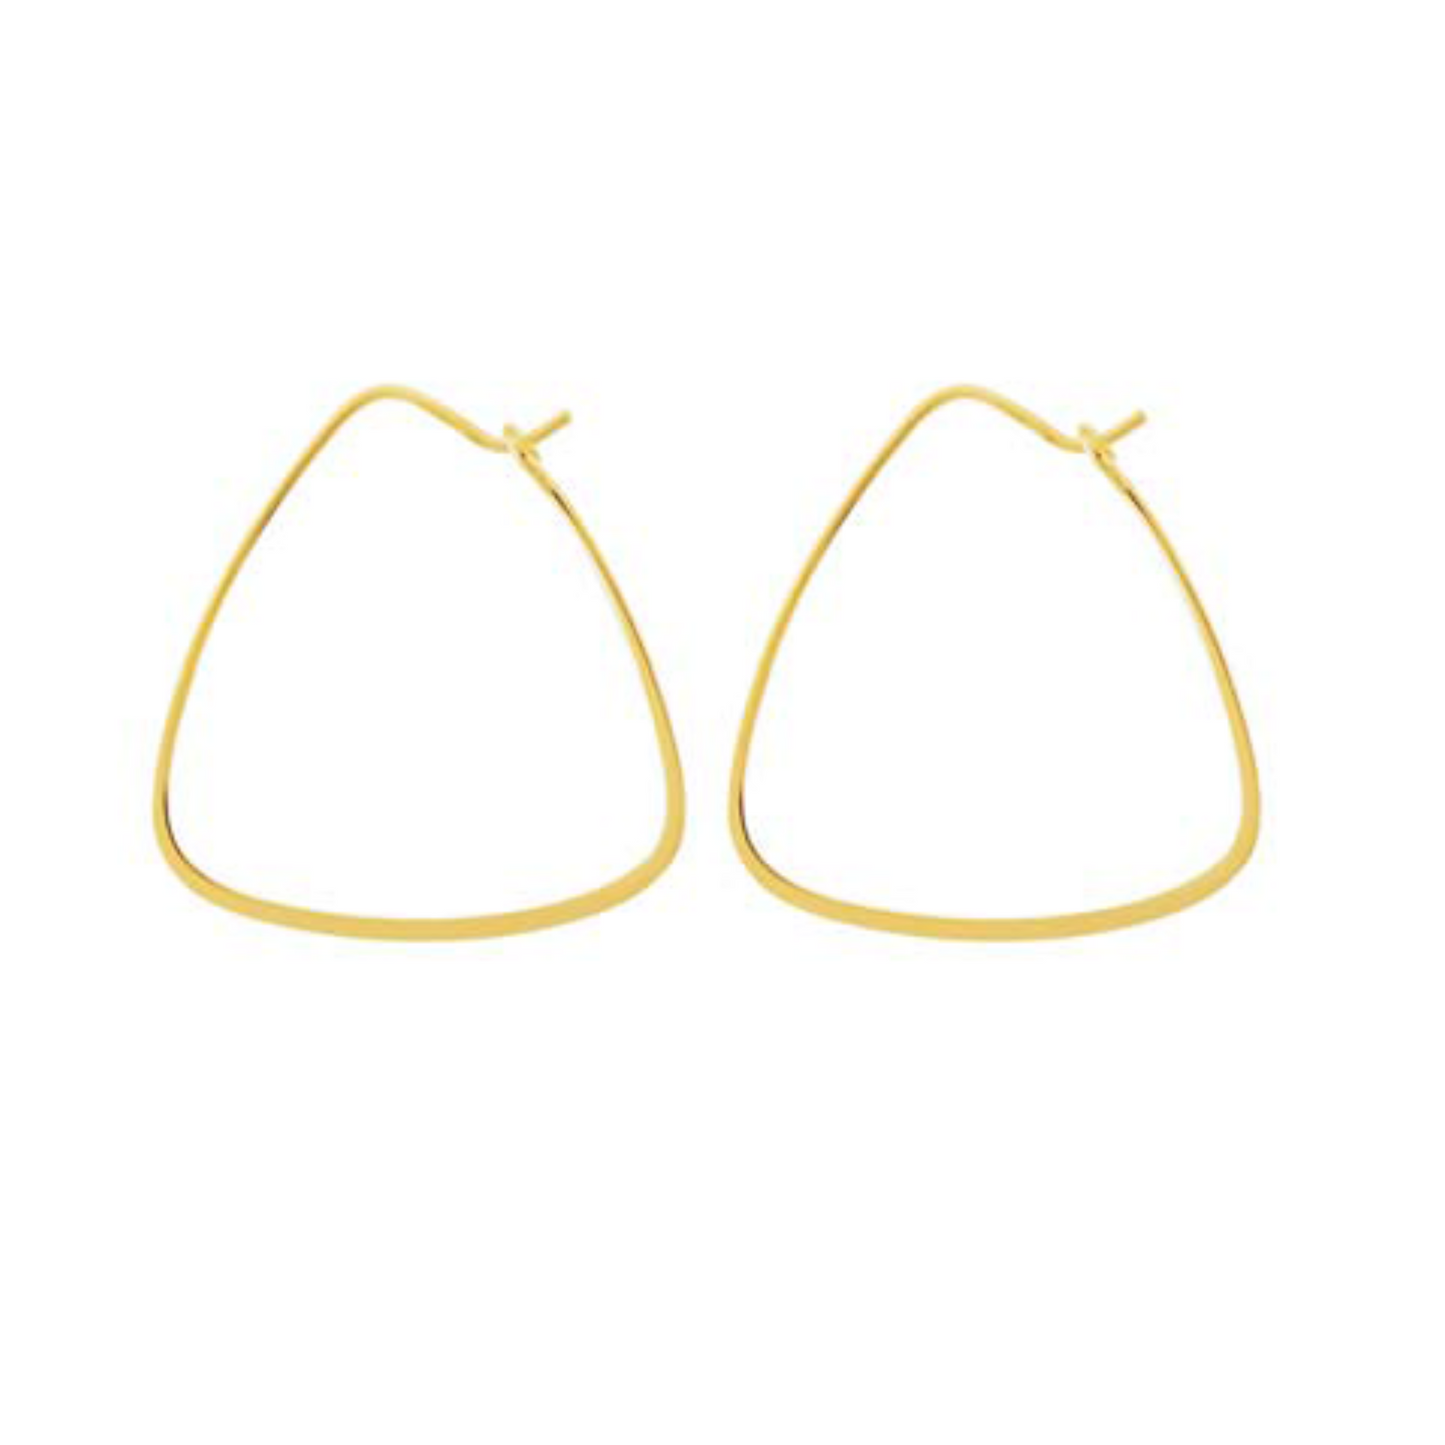 Rounded Triangle Wire Hoop